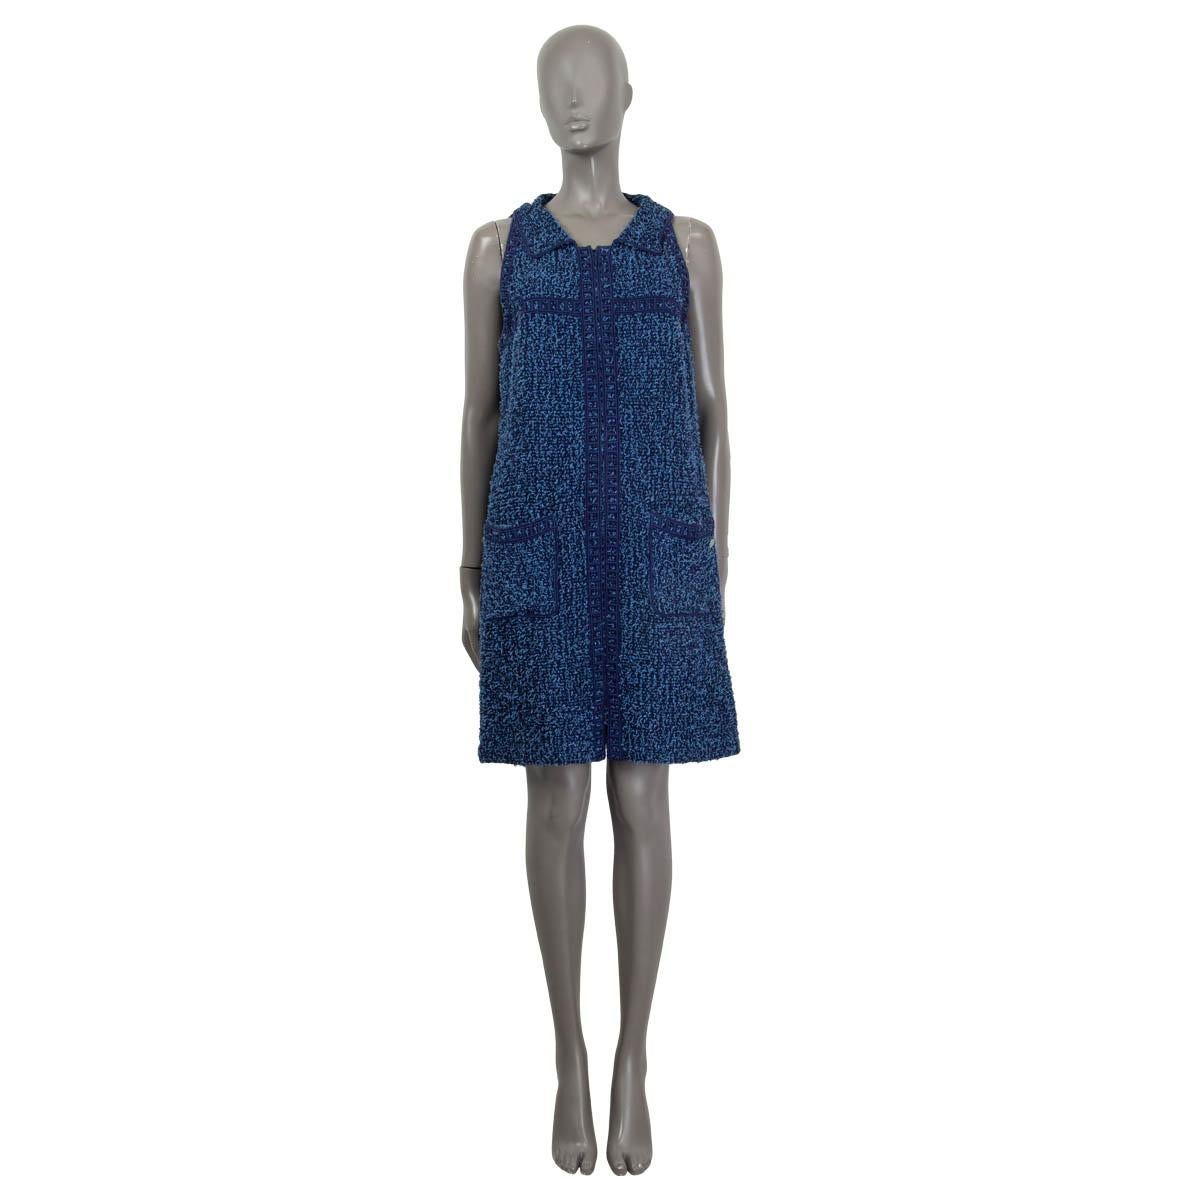 100% authentic Chanel sleeveless tweed dress in blue and navy cotton (57%), nylon (36%) and wool (7%). Features two patch pockets on the front and an embroidered trim. Opens with a concealed zipper and a hook at the front. Lined in blue cotton